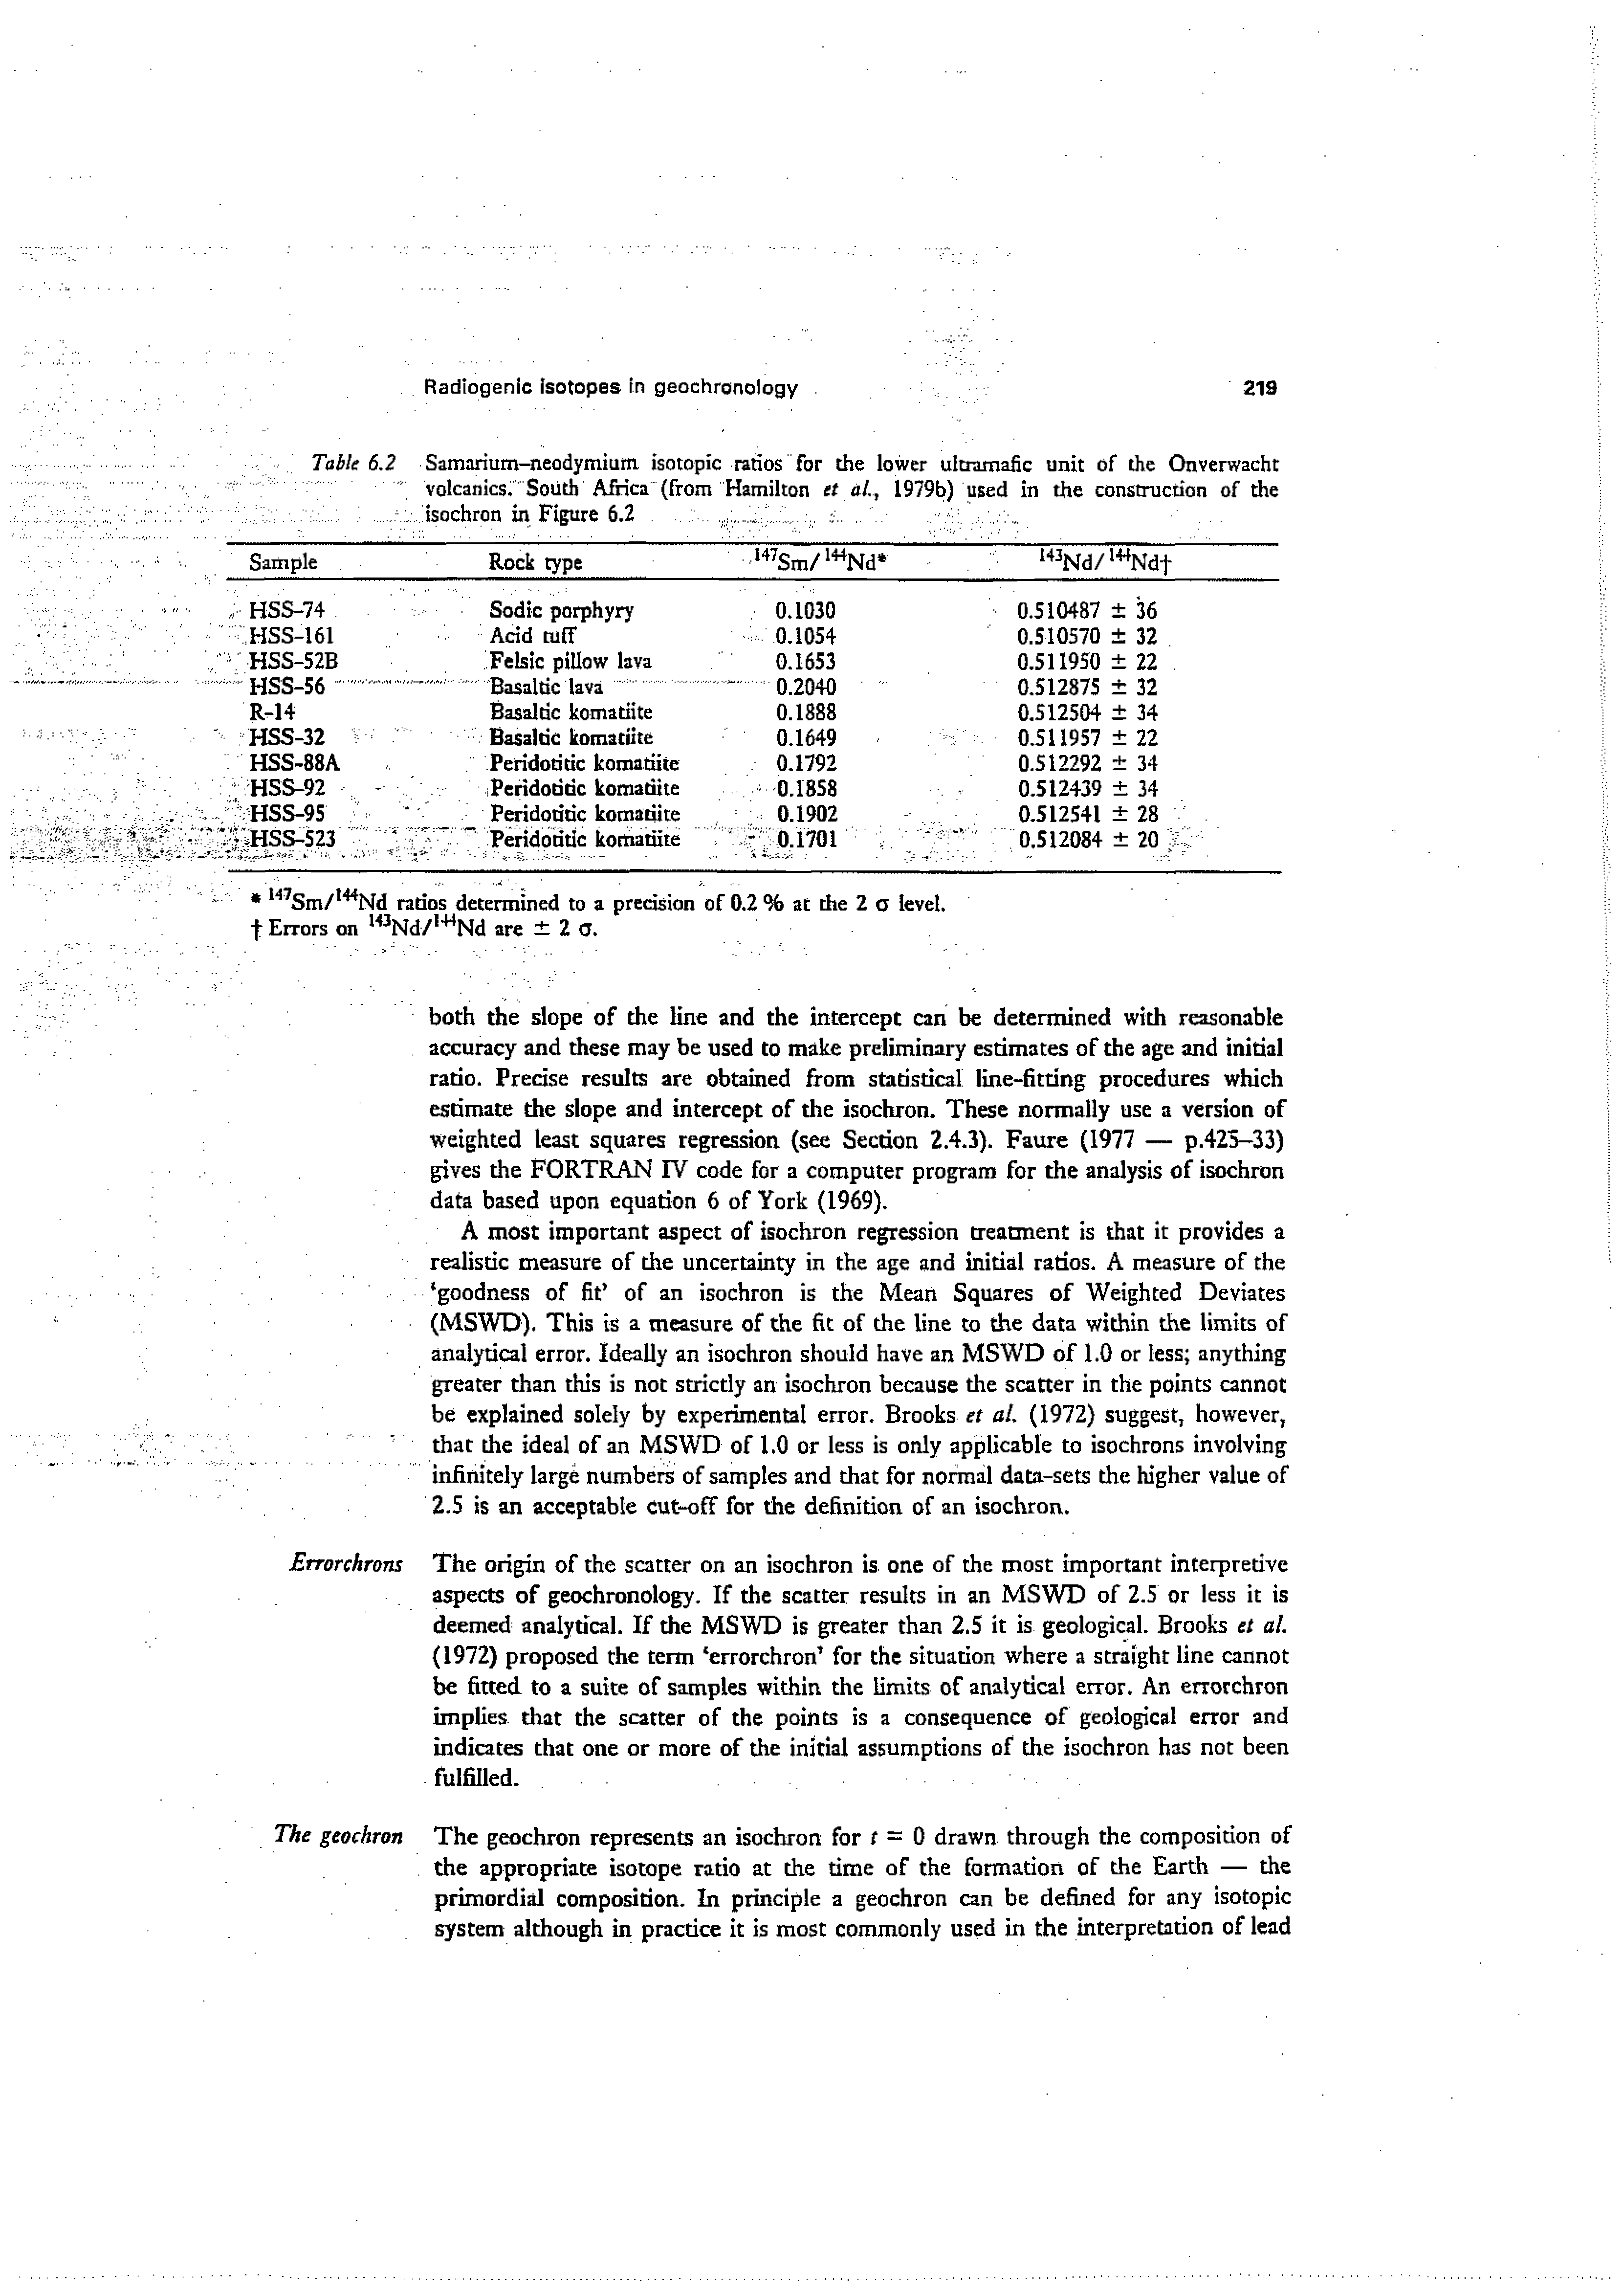 Table 6.2 Samarium-neodymium isotopic ratios for the lower ultramafic unit of the Onverwacht volcanics. South Africa (from Hamilton et aL, 1979b) used in the construction of the. isochron in Figure 6.2. . ...